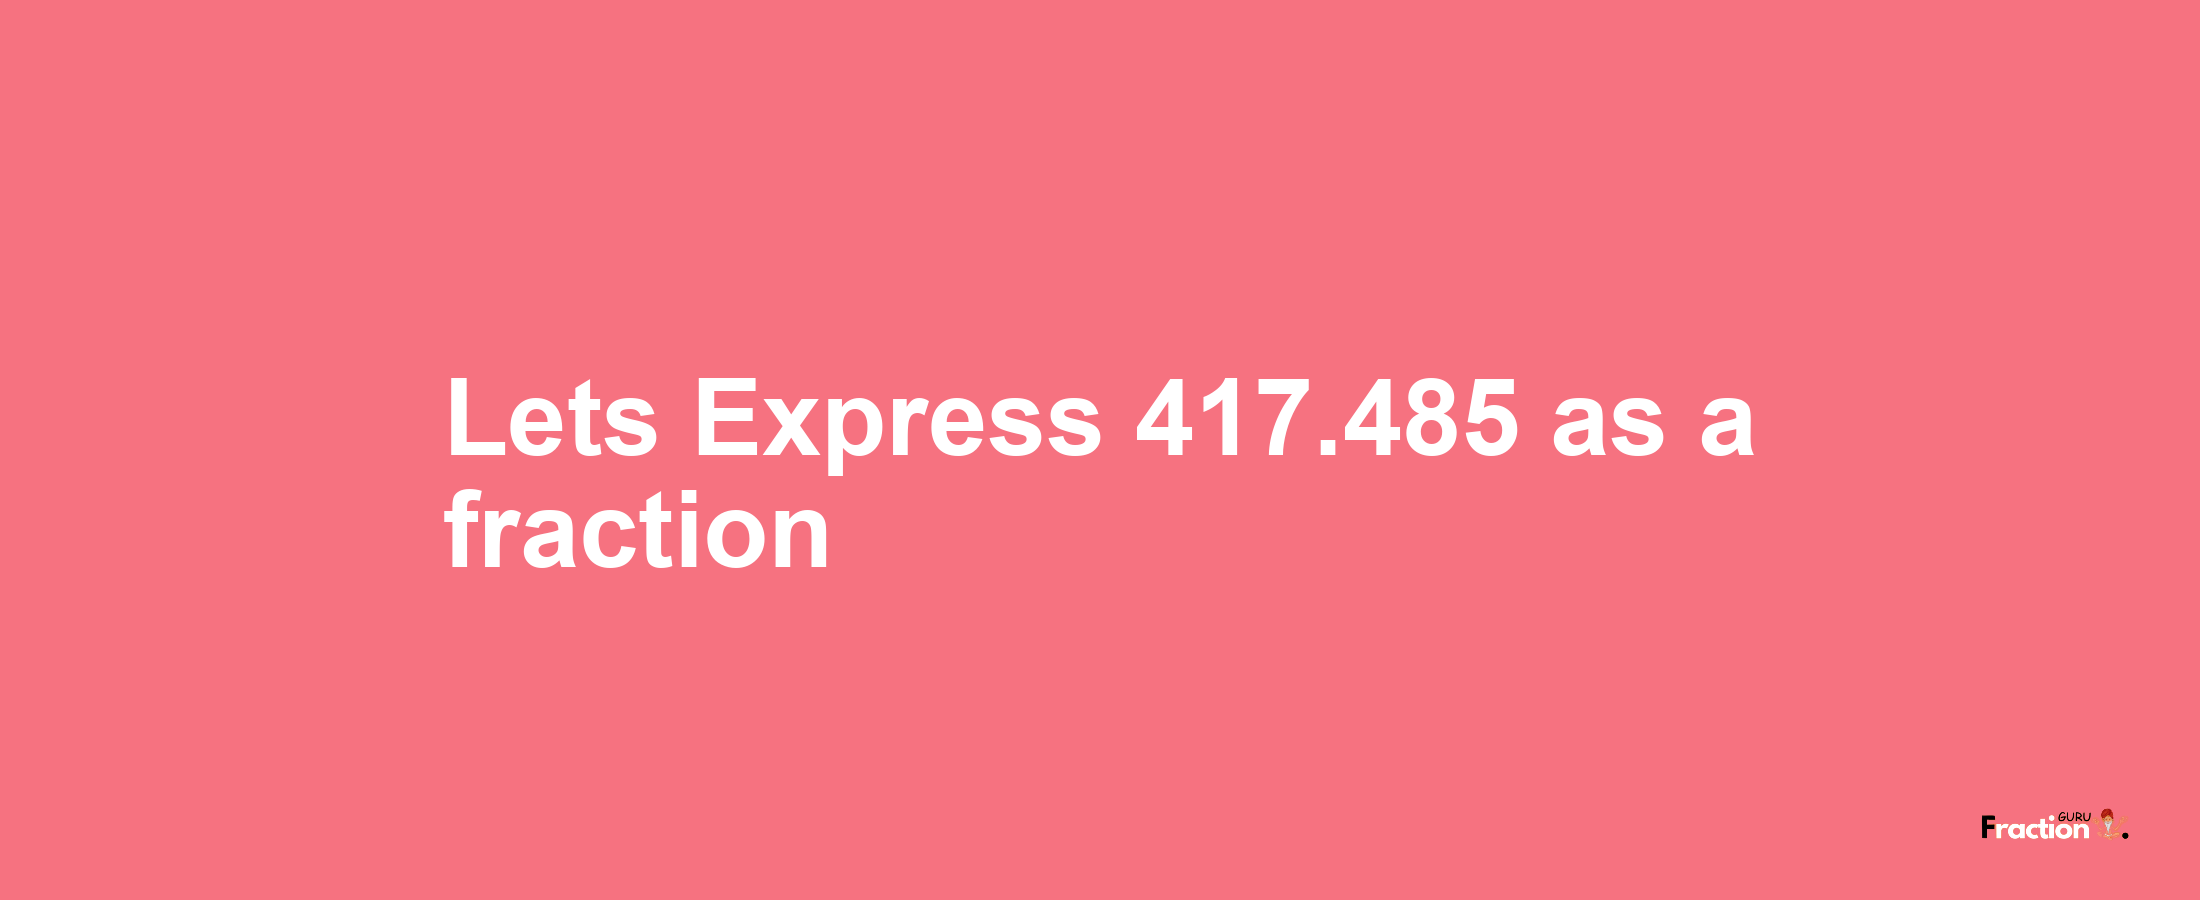 Lets Express 417.485 as afraction